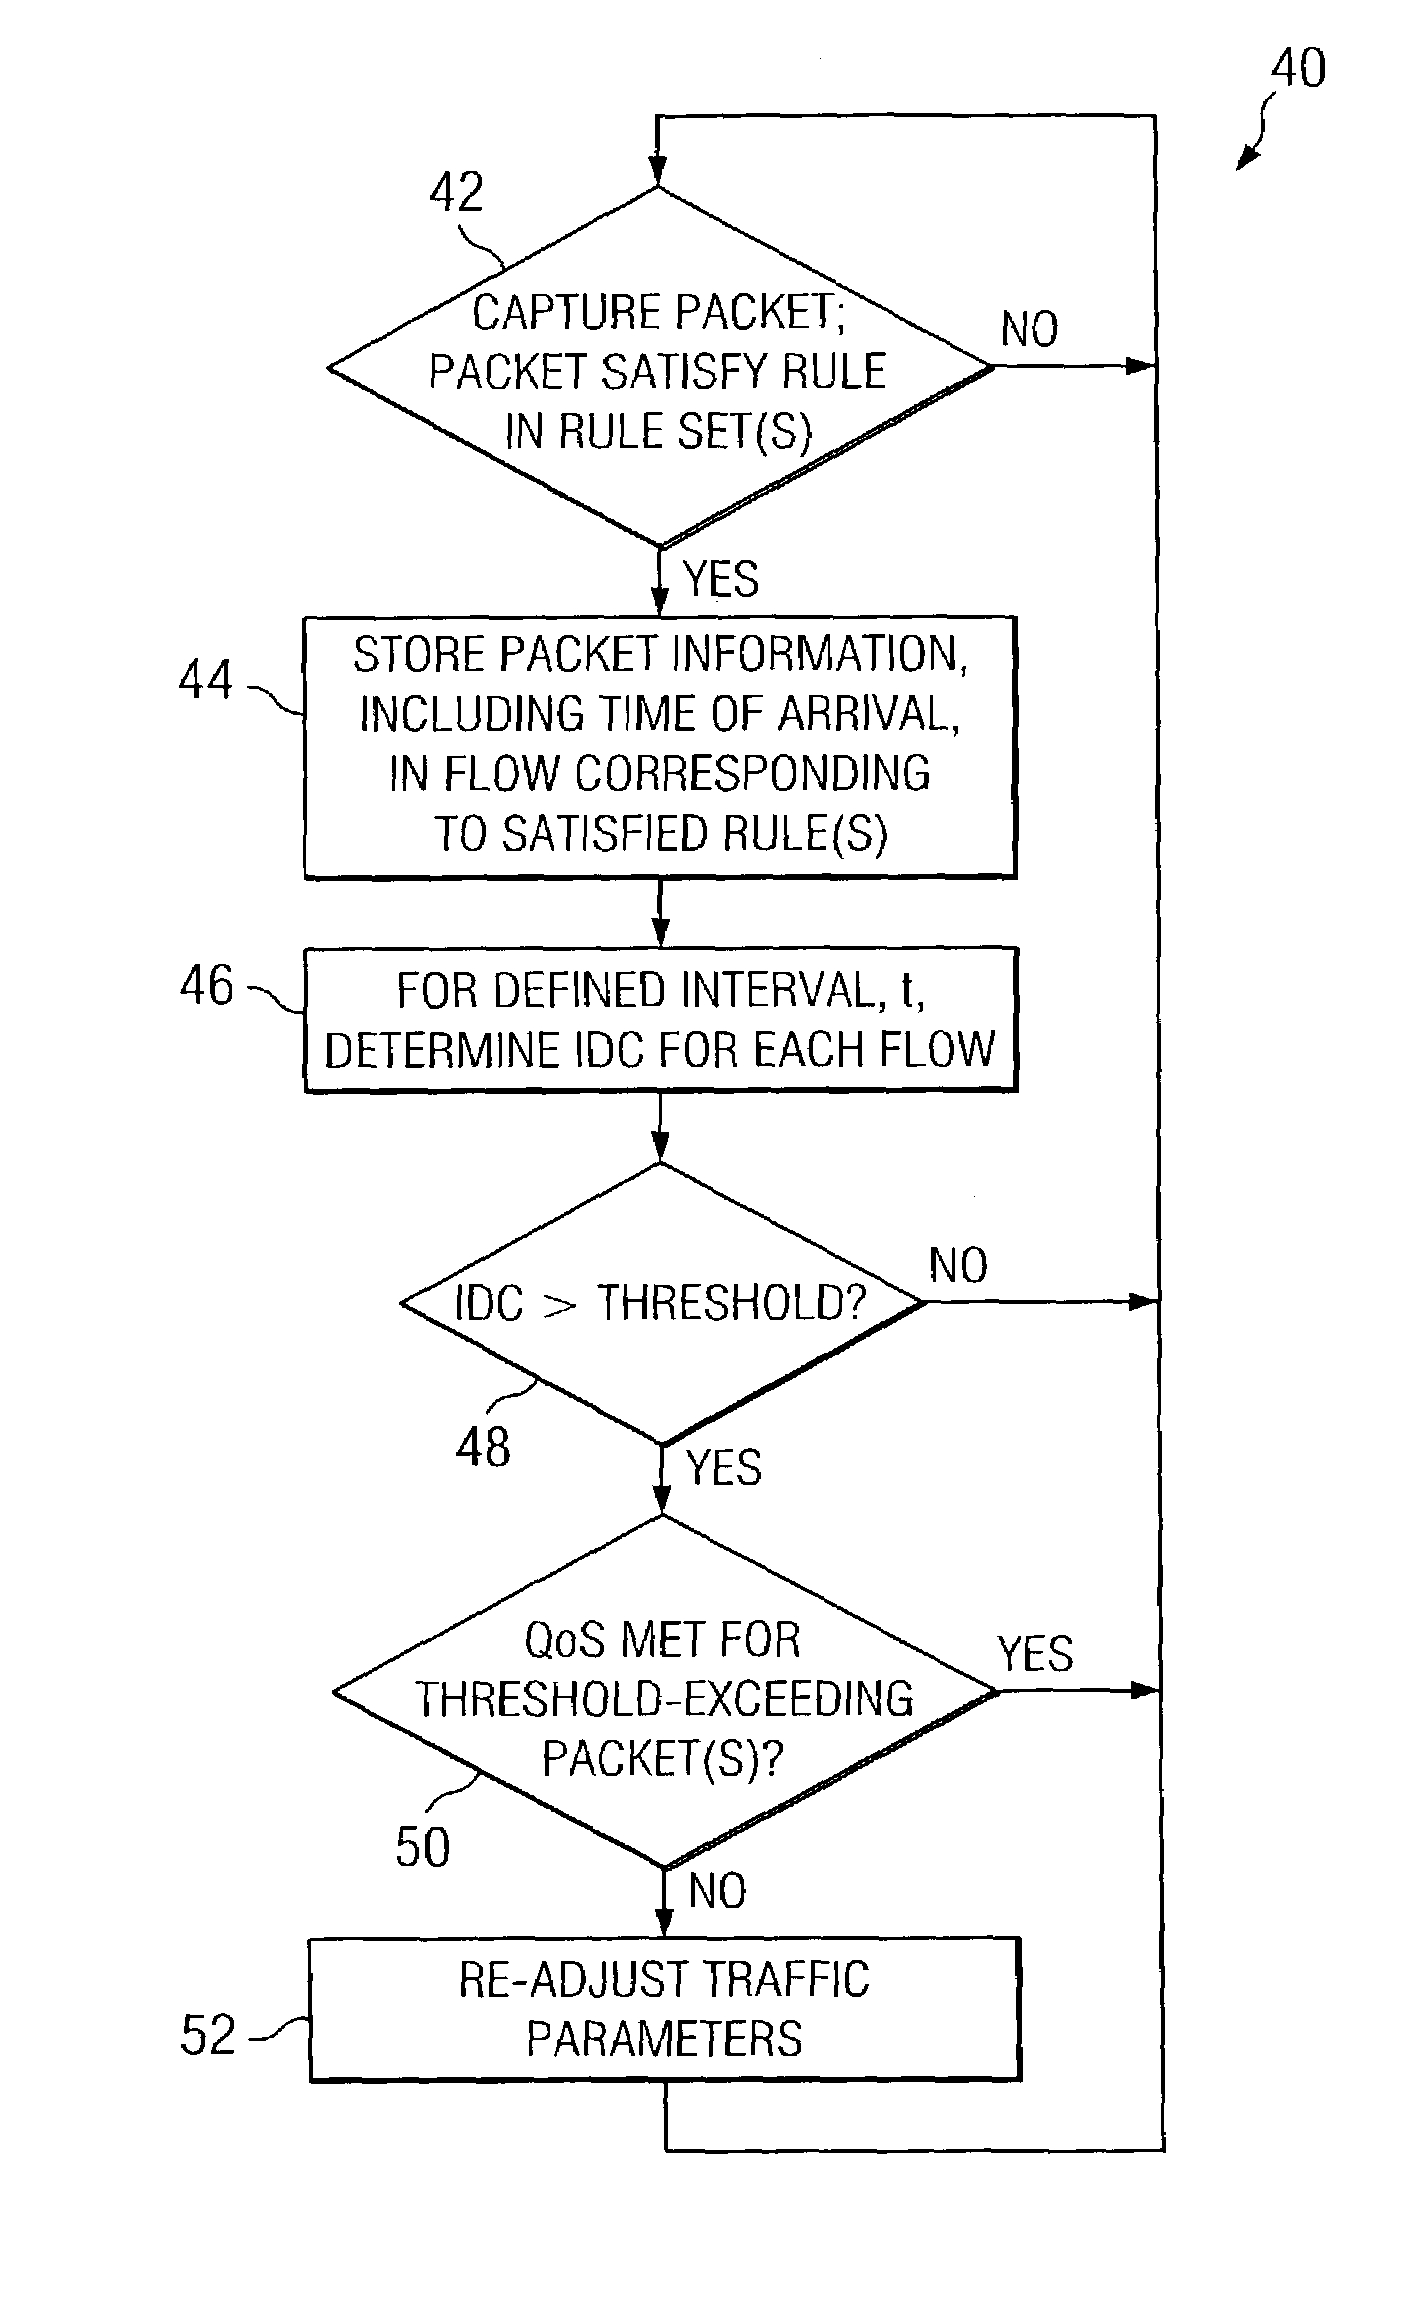 Network monitoring system responsive to changes in packet arrival variance and mean